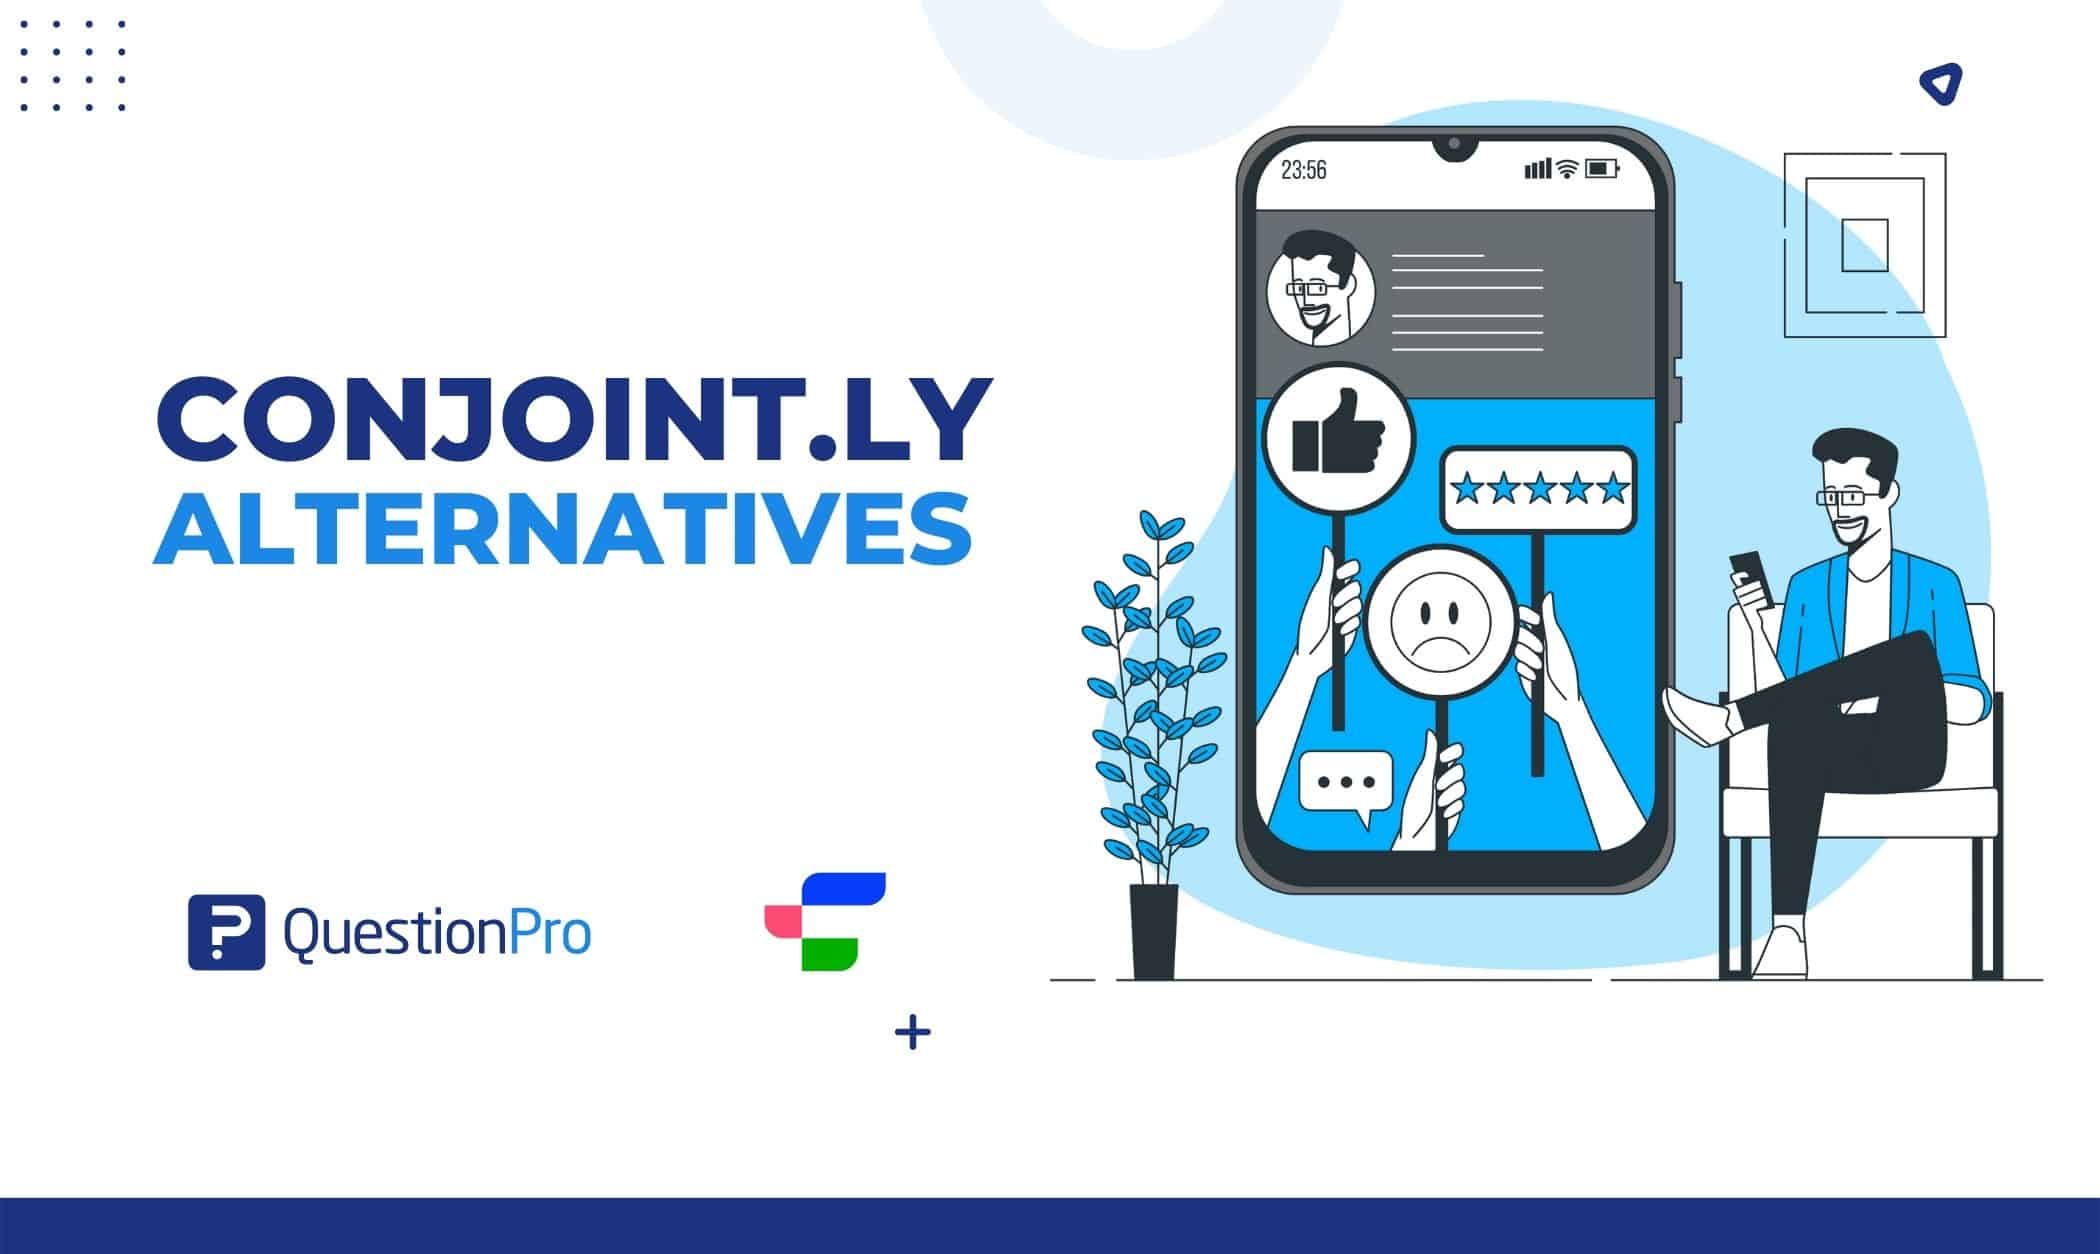 There are many Conjoint.ly alternatives you should know. Find the best replacement for Conjoint.ly in this article we crafted just for you.